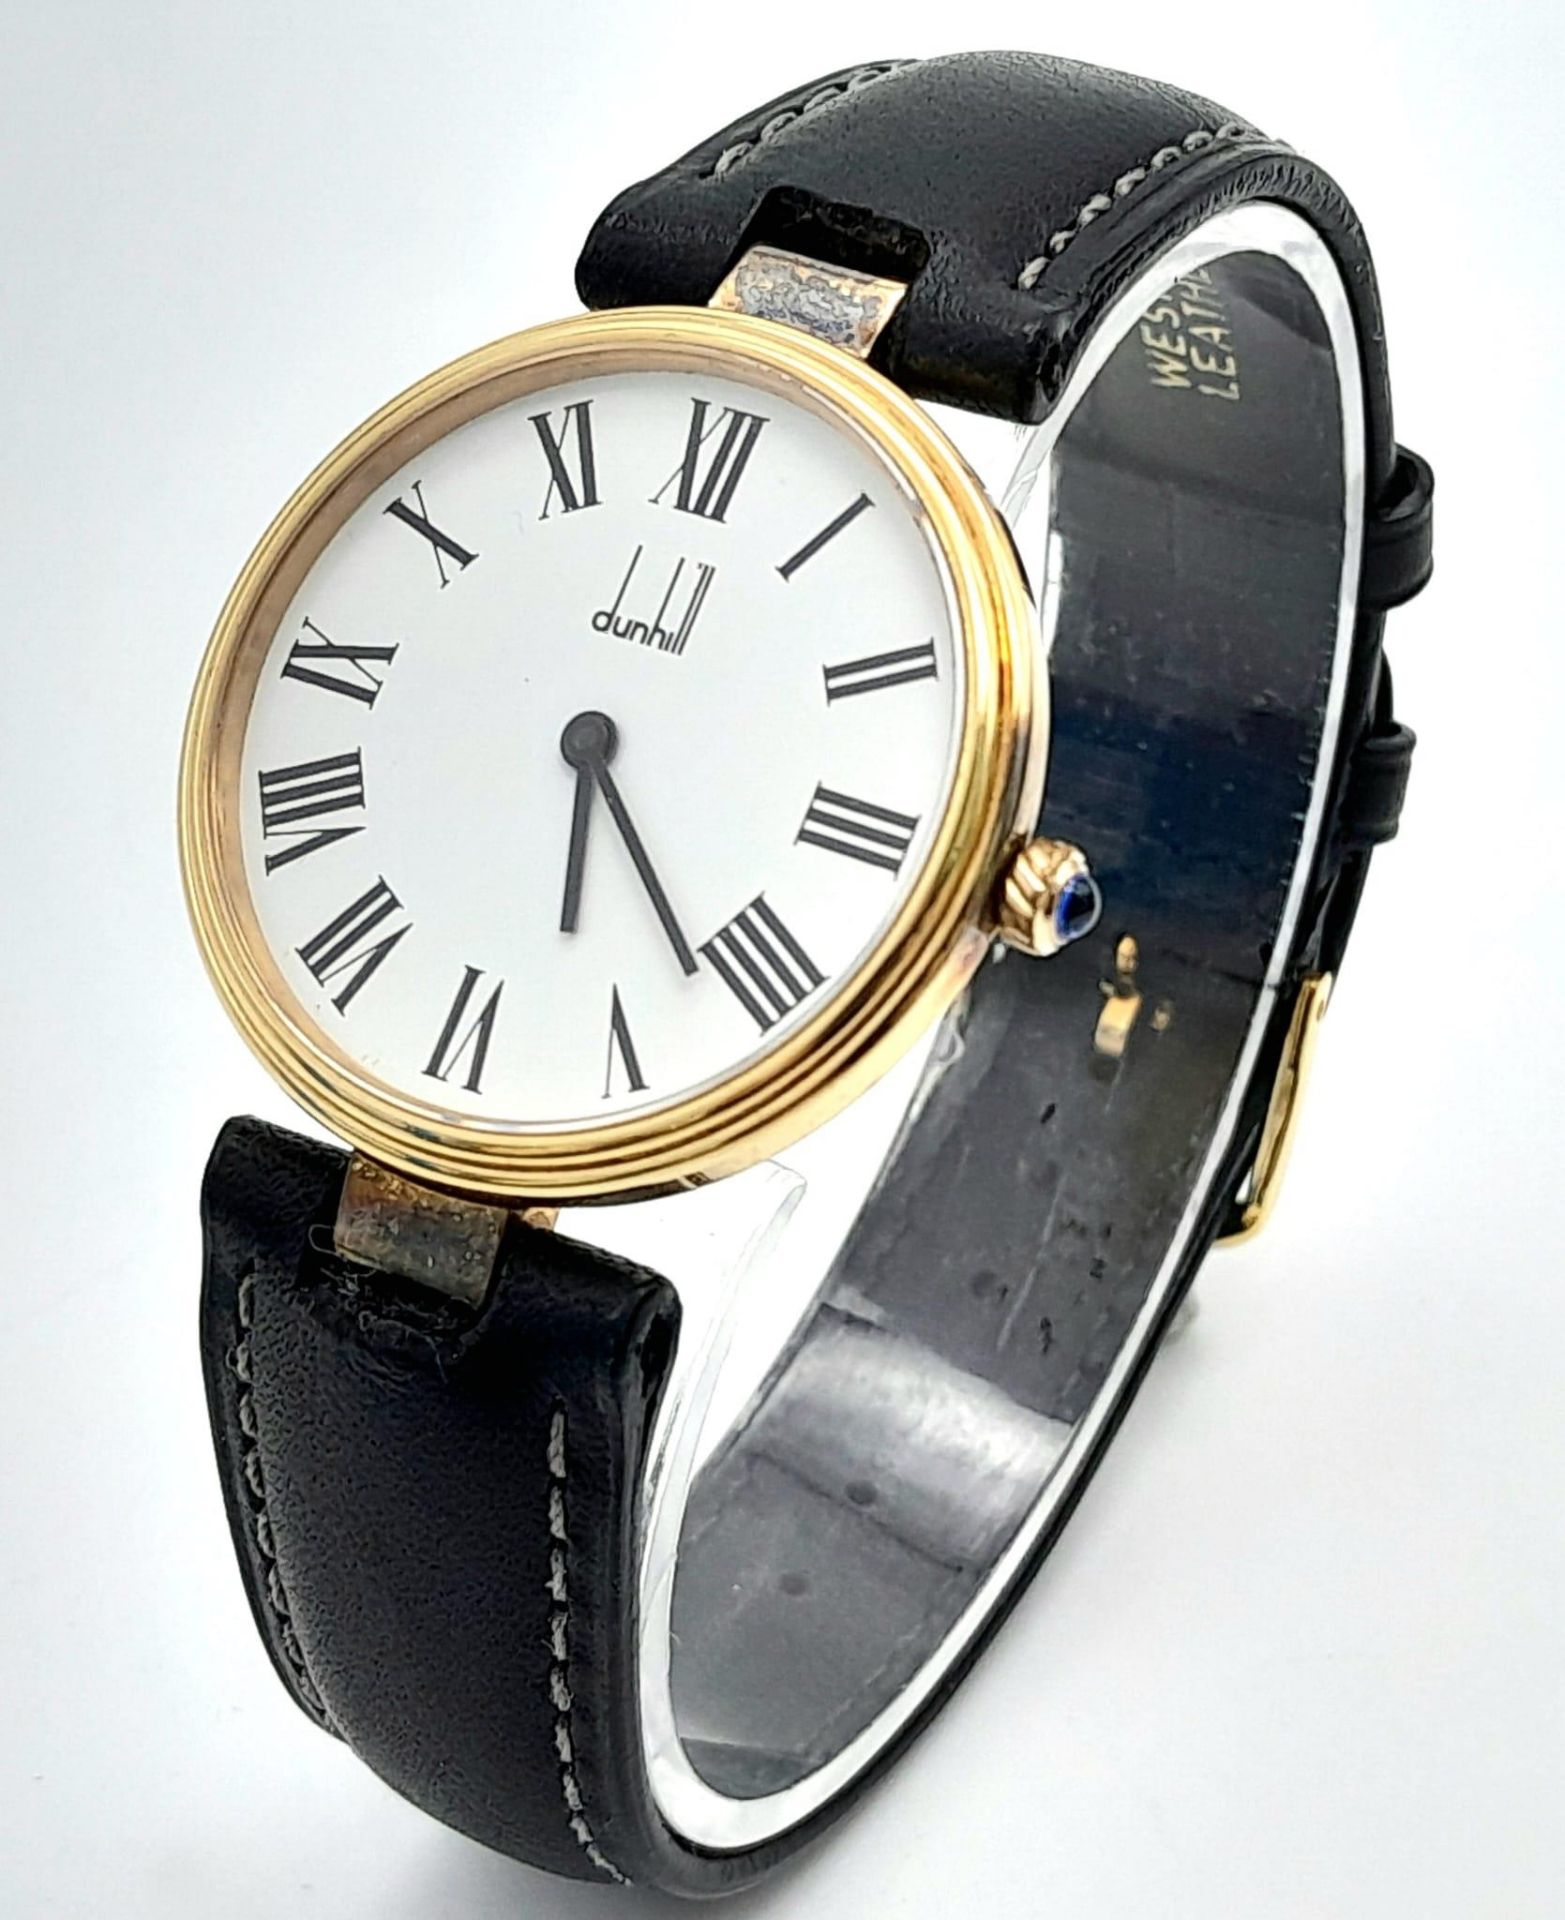 A Dunhill Sterling Silver Gilt Chronometer Watch. 34mm Case, Black Leather Strap. Full Working - Bild 2 aus 8